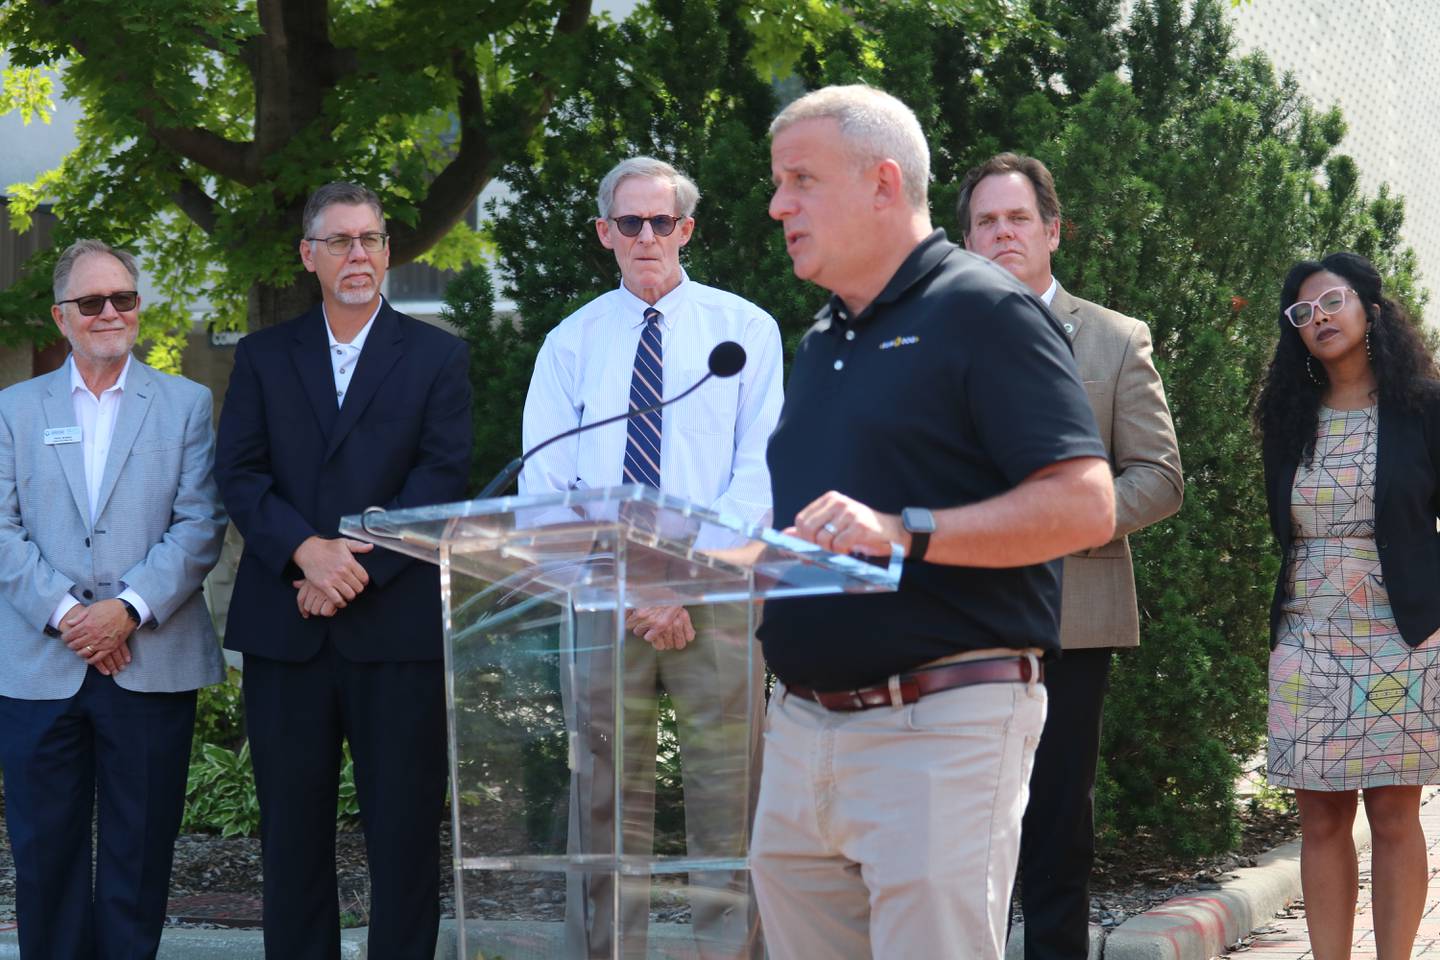 DeKalb Mayor Cohen Barnes gives remarks during an Aug. 2, 2022 press conference. The event also featured a ribbon cutting to celebrate the completion of an electric vehicle charging station in the city's downtown.